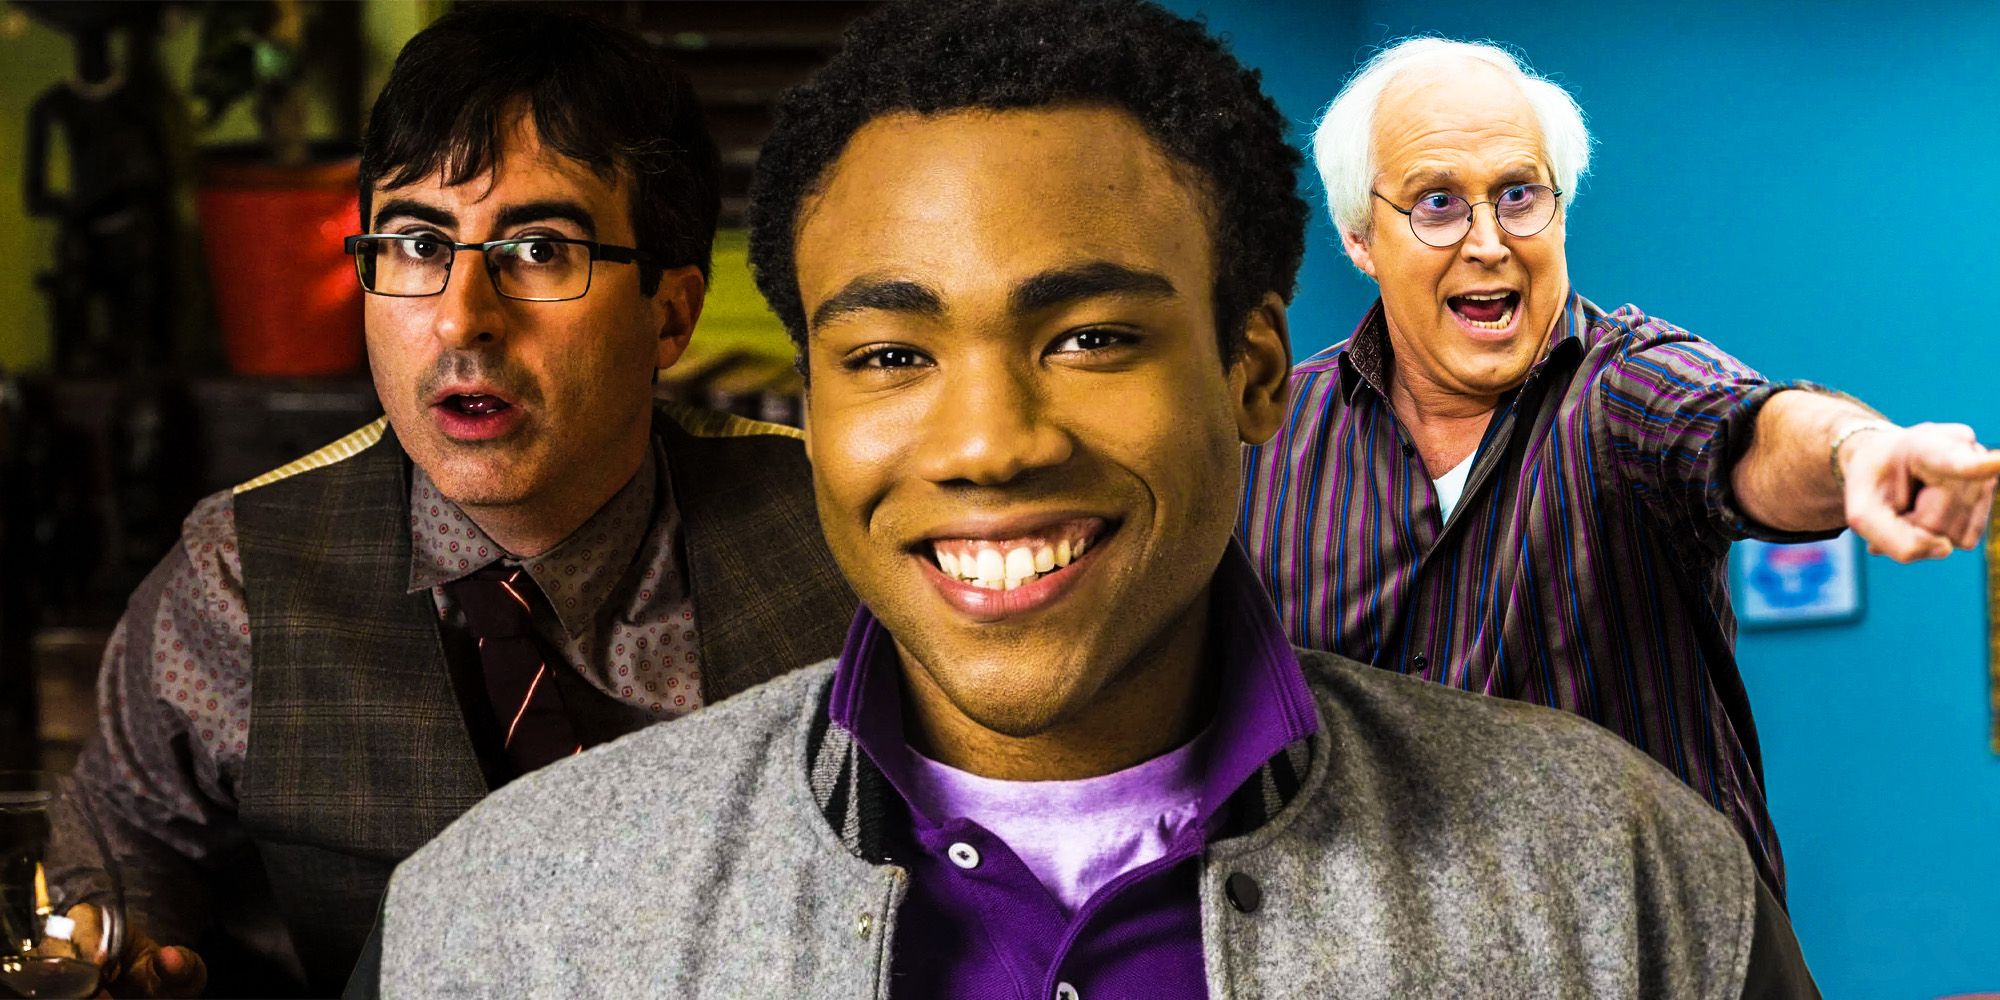 Community: Every Major Actor Who Left The Show (& Why)